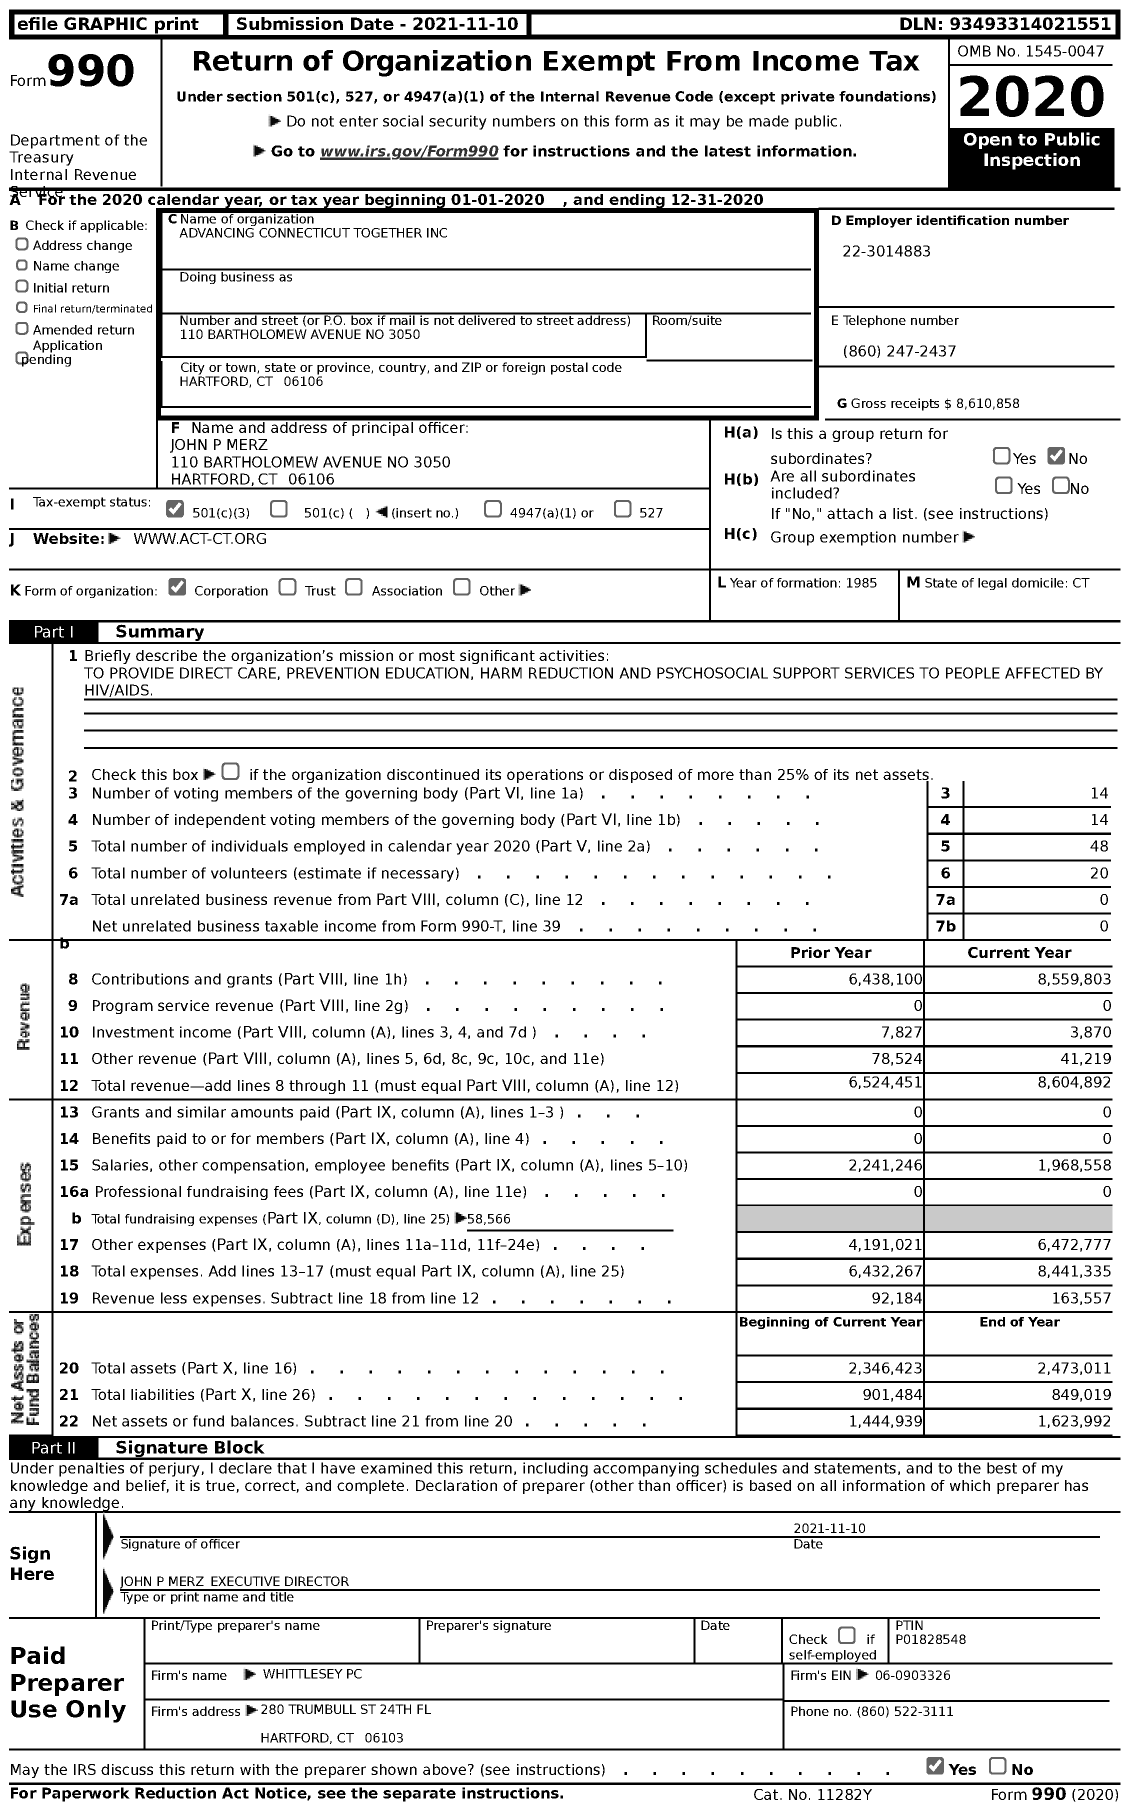 Image of first page of 2020 Form 990 for Advancing Connecticut Together